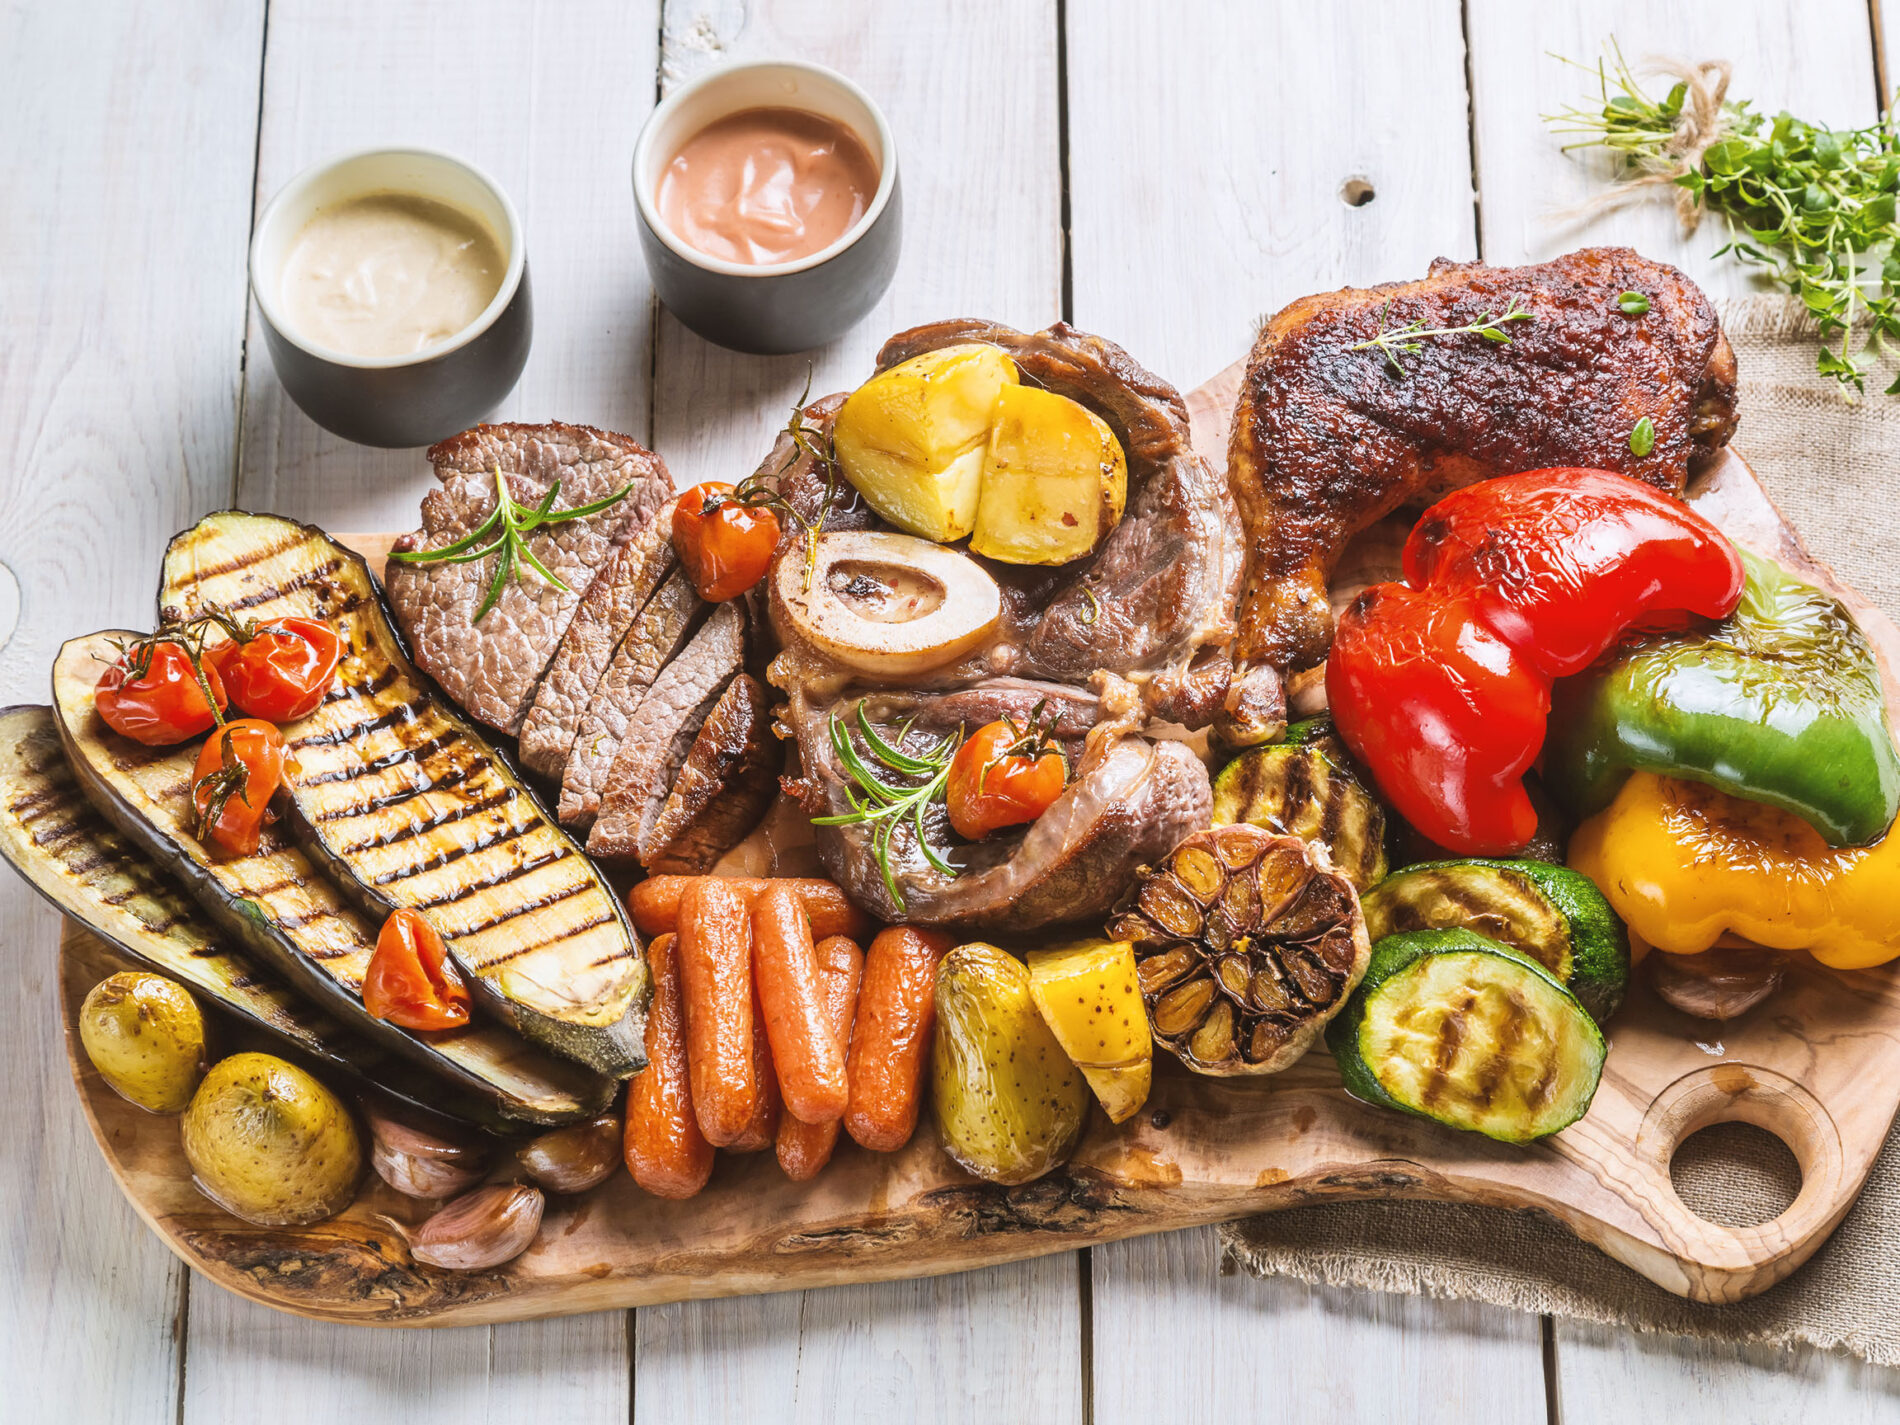 a plate of grilled vegetables and meat